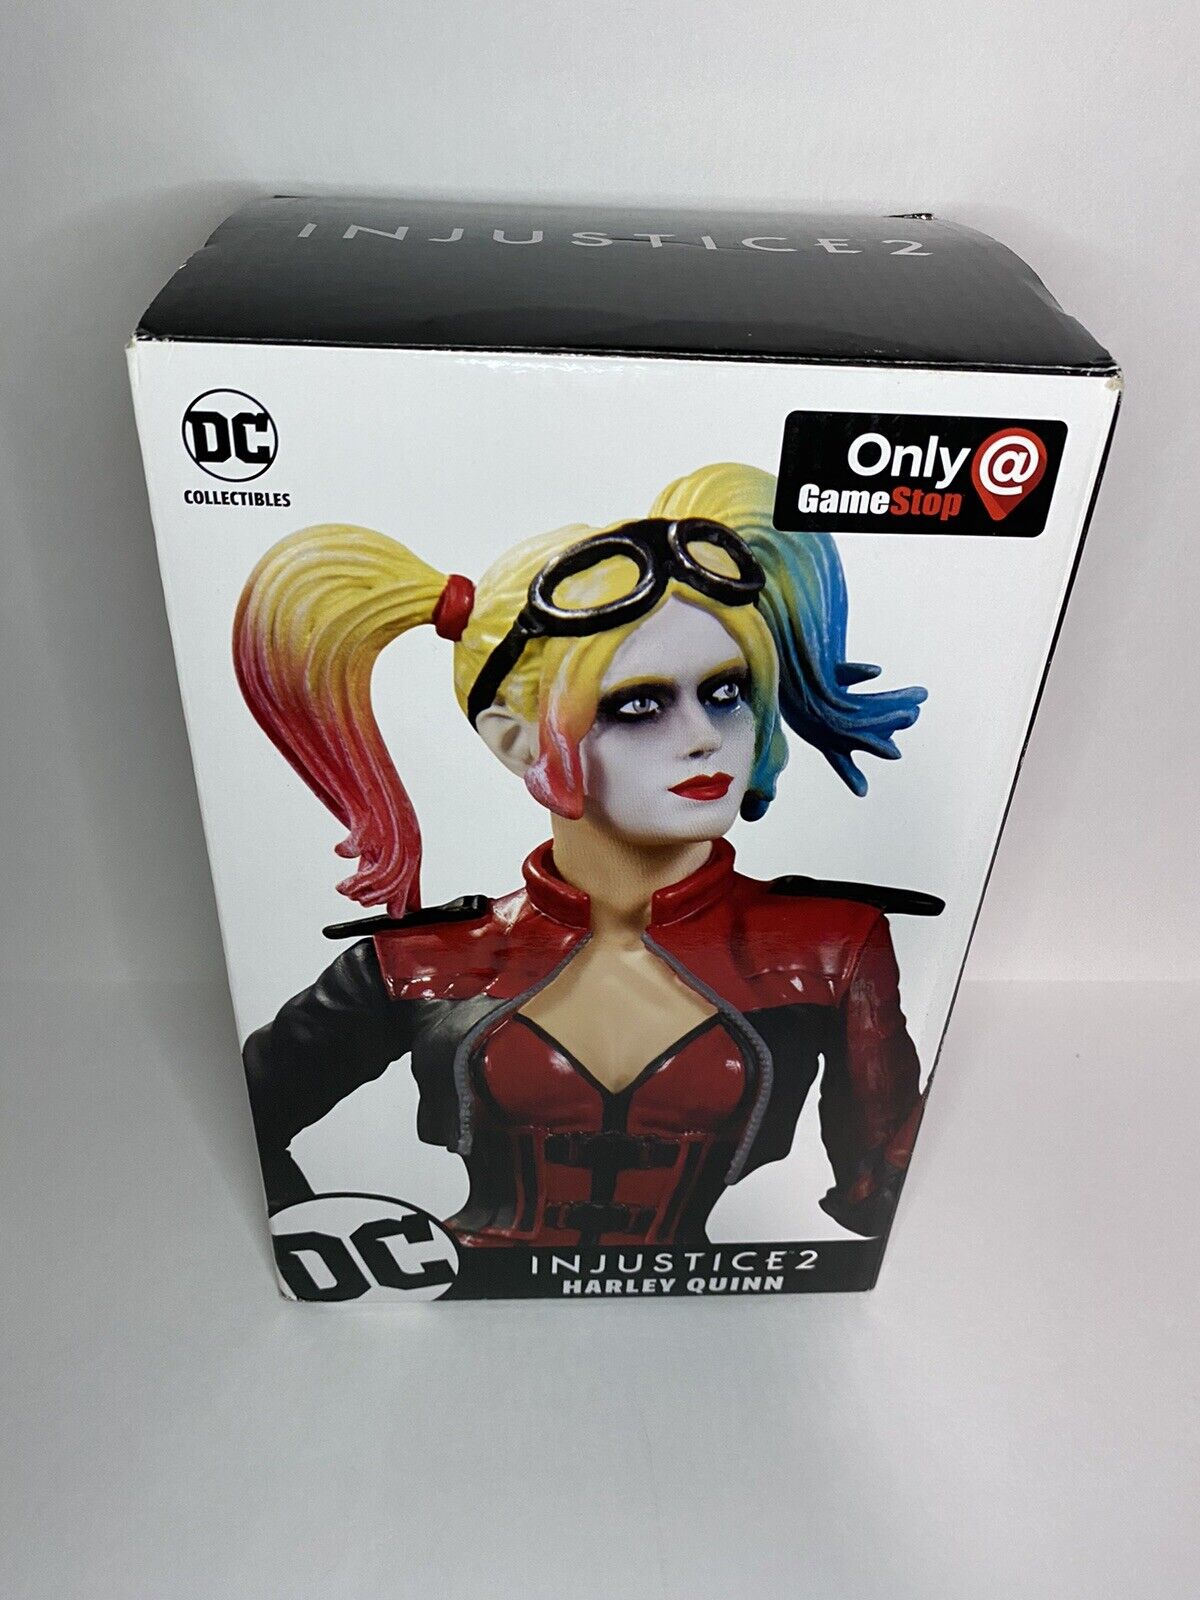 Harley Quinn  Injustice 2 Statue GameStop DC Collectibles